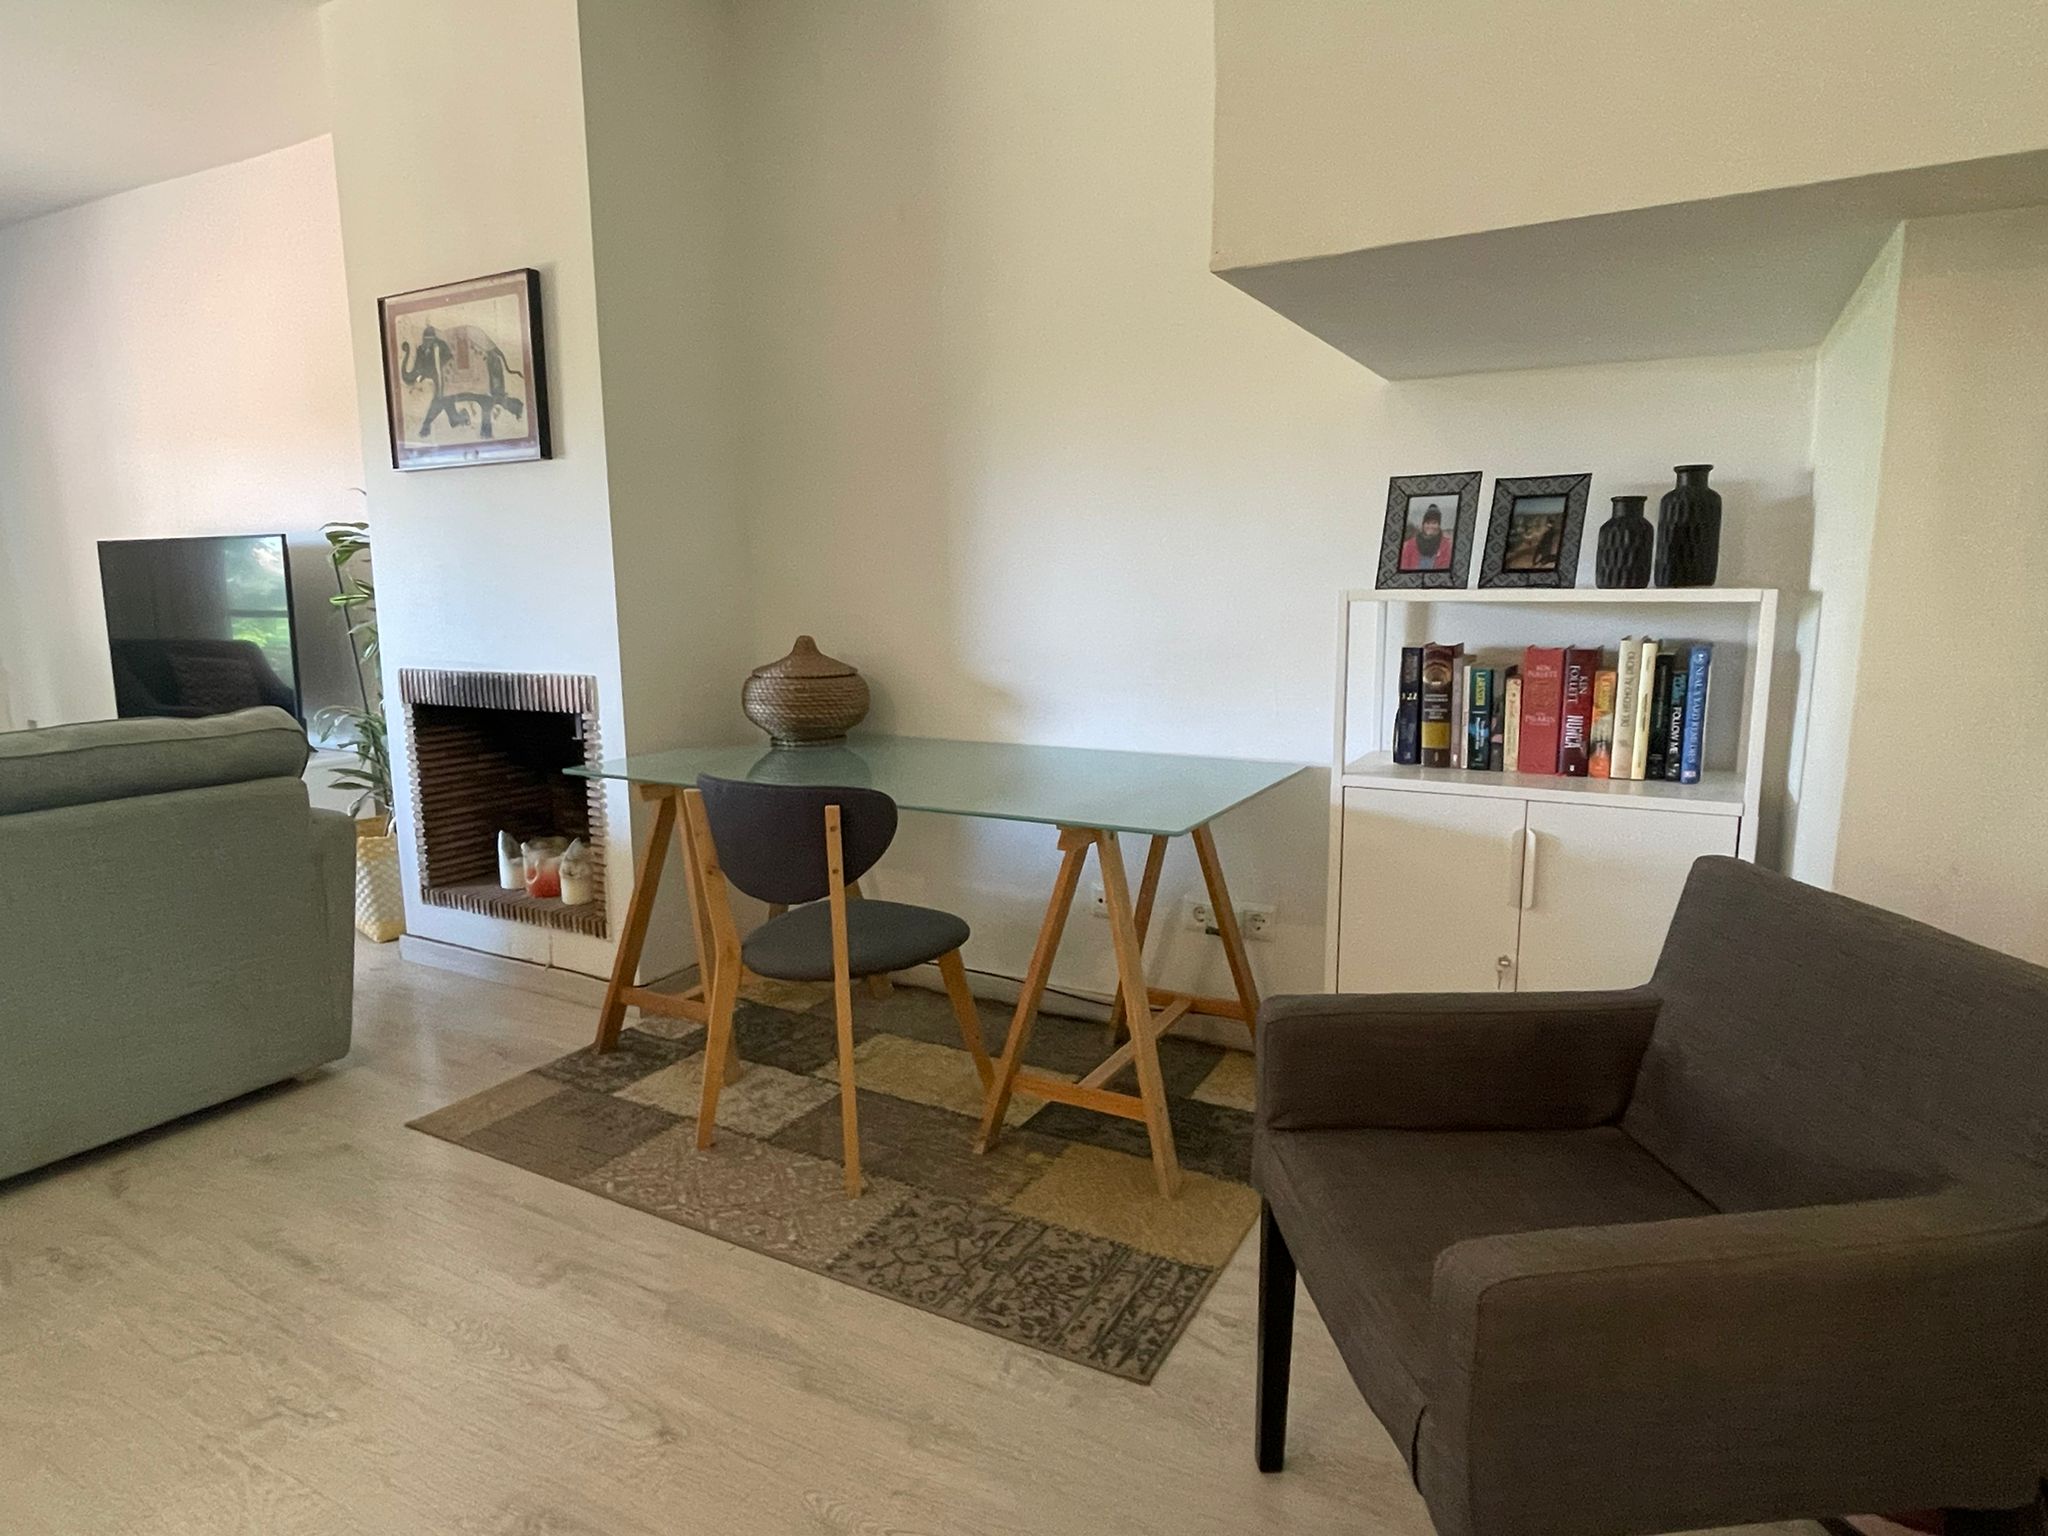 House for rent in Benalmadena, Malaga, office